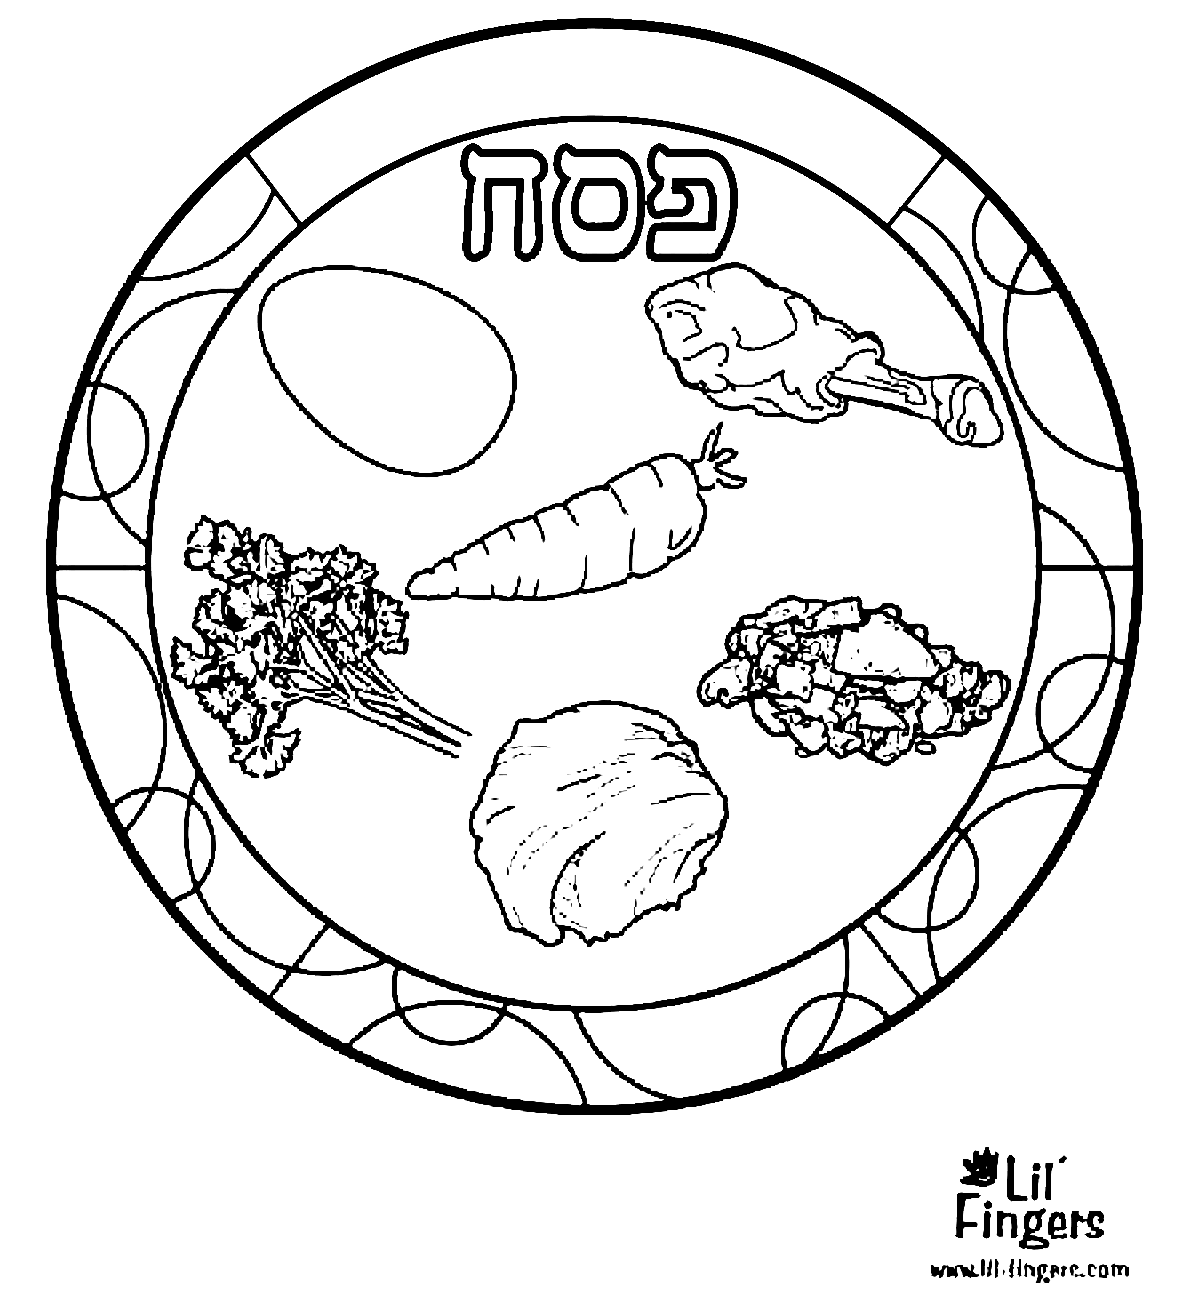 Free Passover Seder Coloring Page